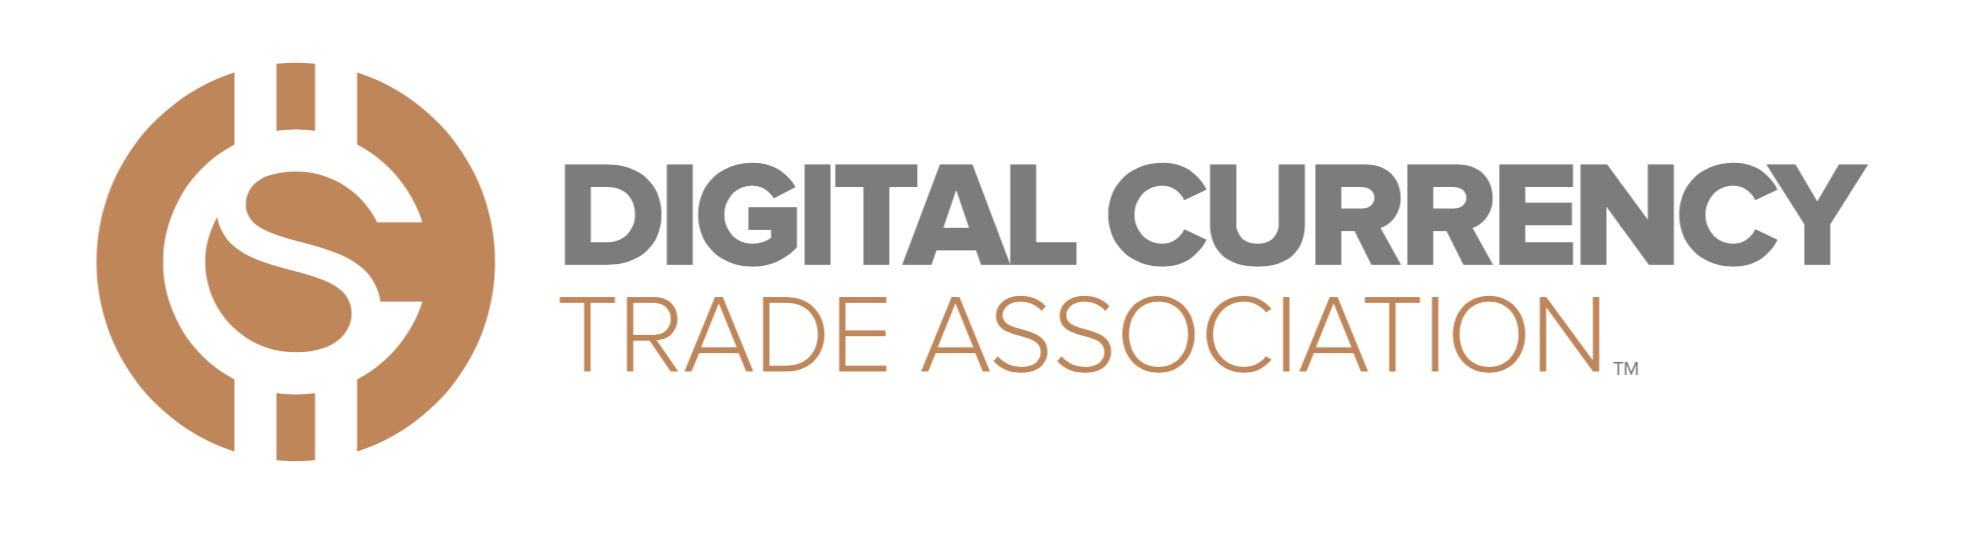 Digital Currency Trade Association Announces Support for Digital Asset Tax Reform